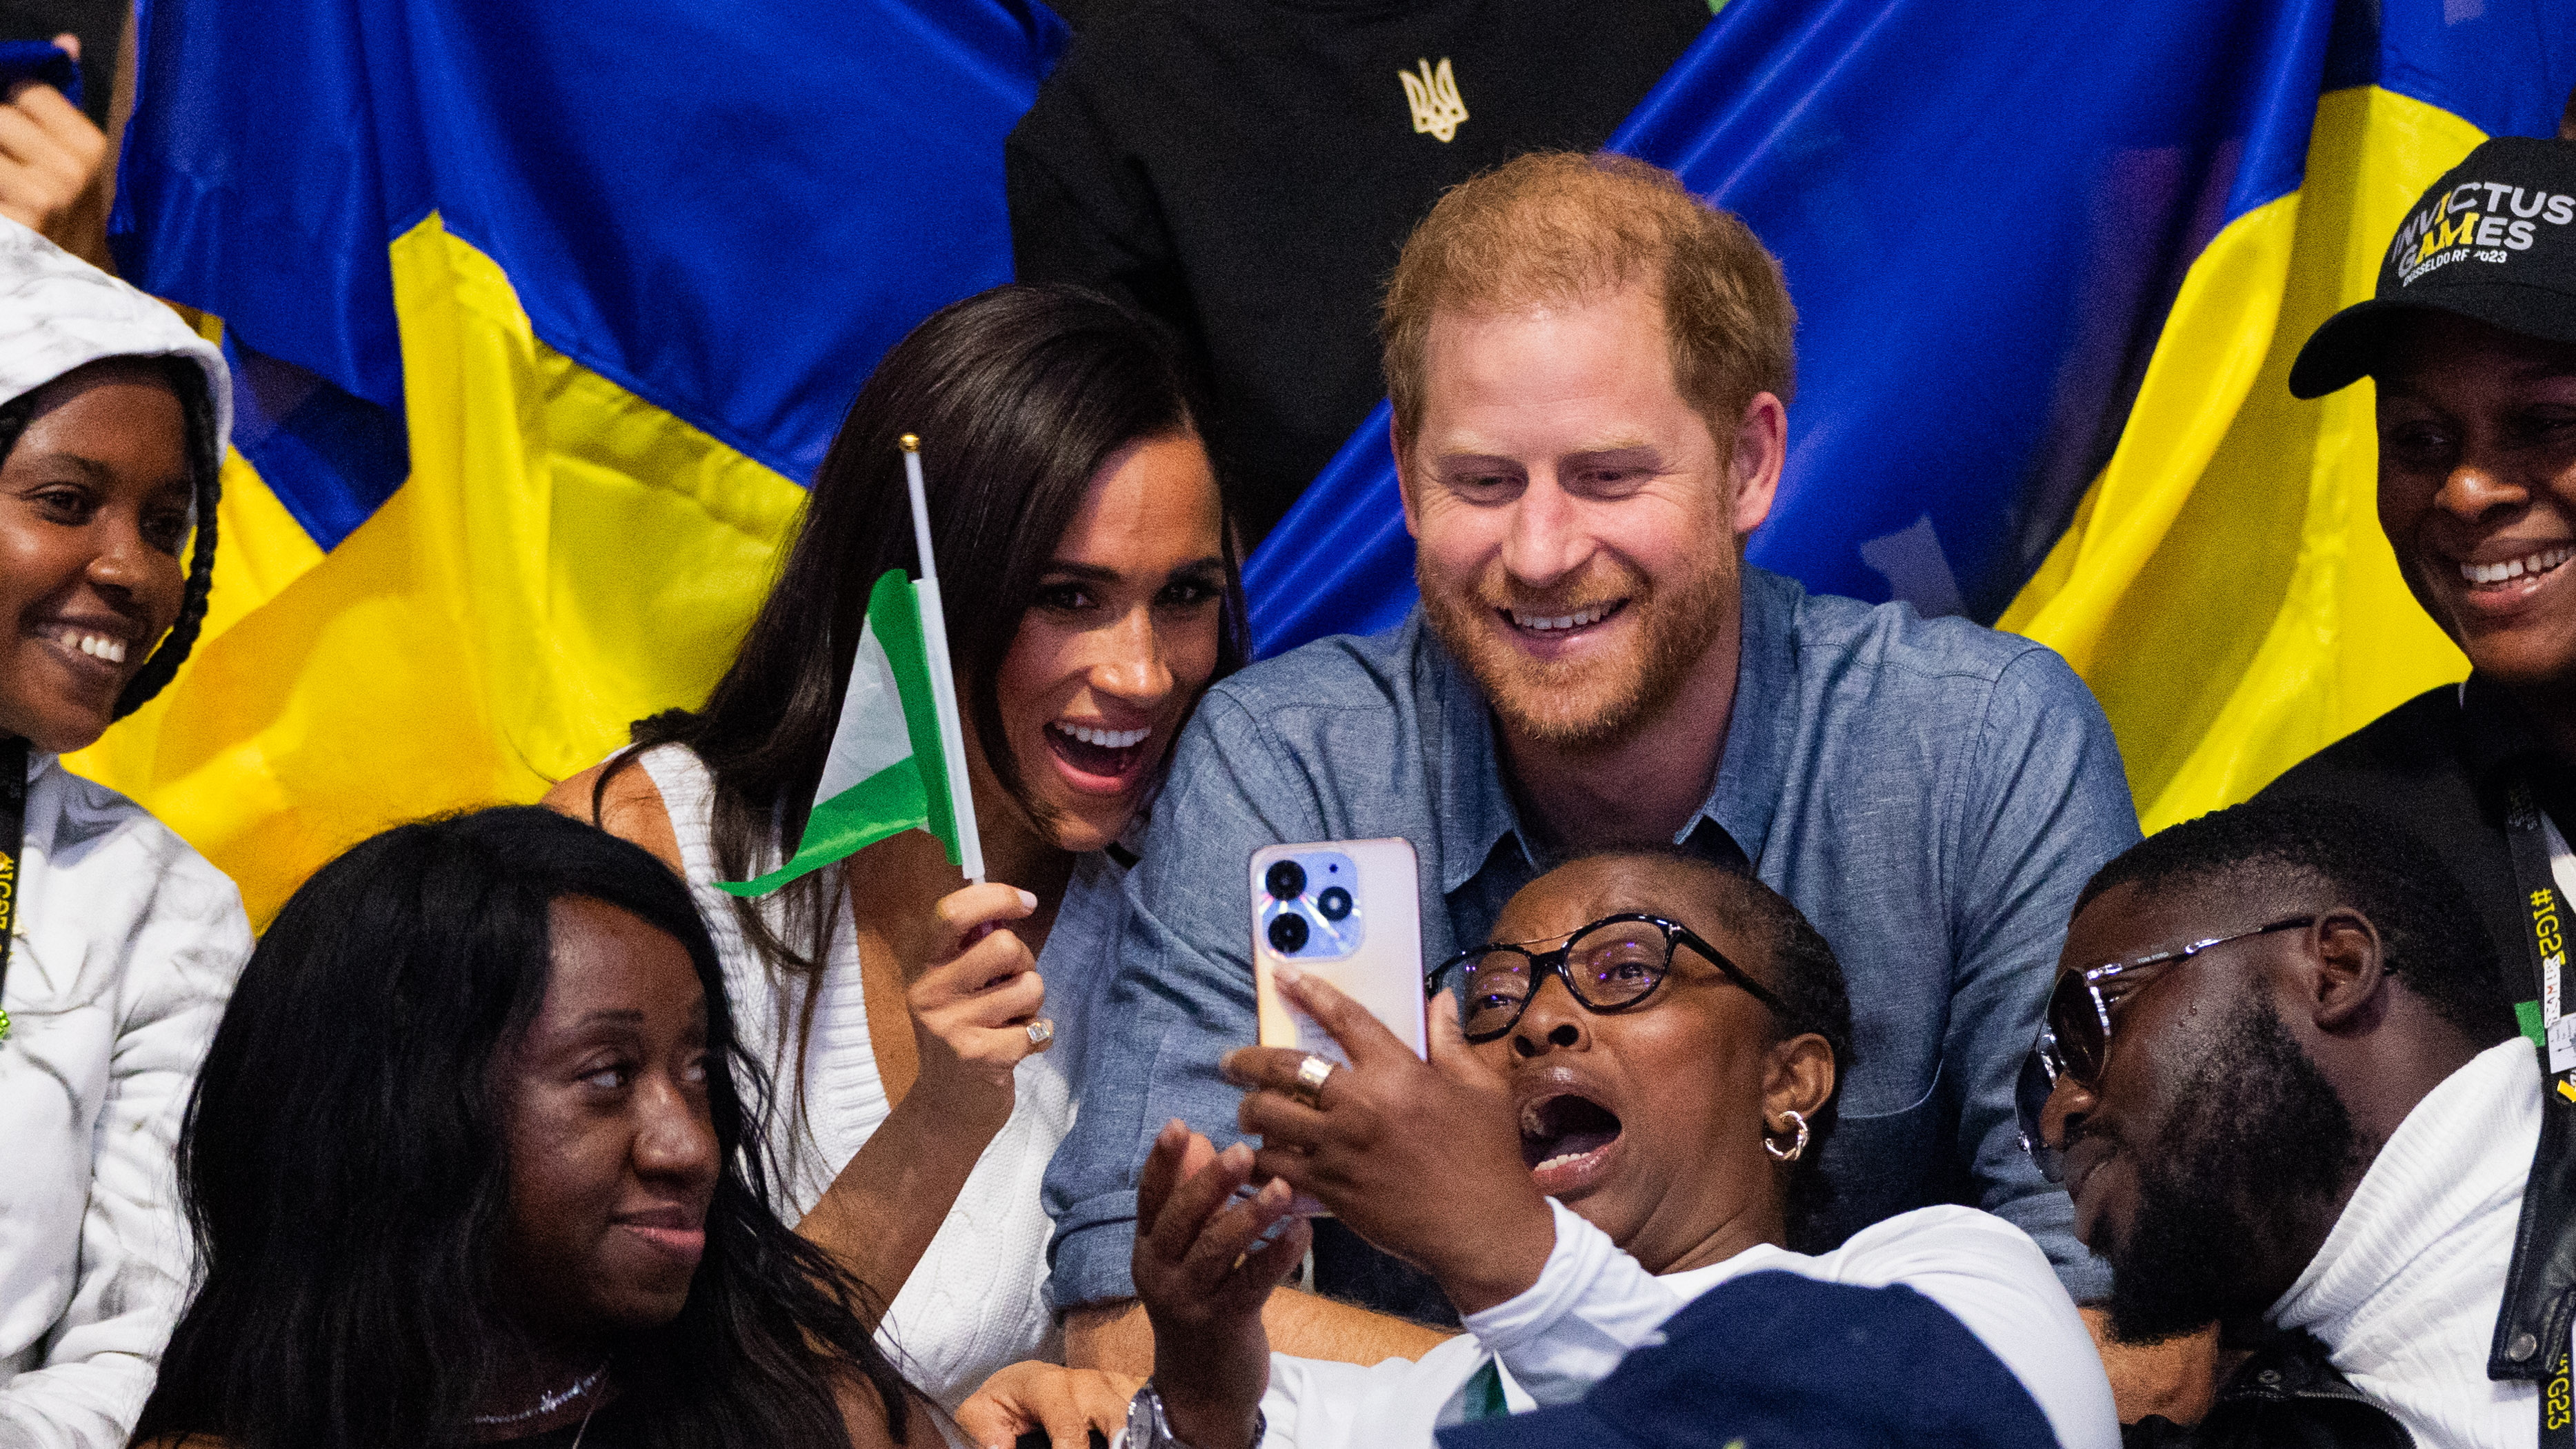 Meghan Markle waving the Nigerian flag with Prince Harry by her side as they interact with Nigerian fans during the 6th Invictus Games in North Rhine-Westphalia, Duesseldorf on September 14, 2023 | Source: Getty Images